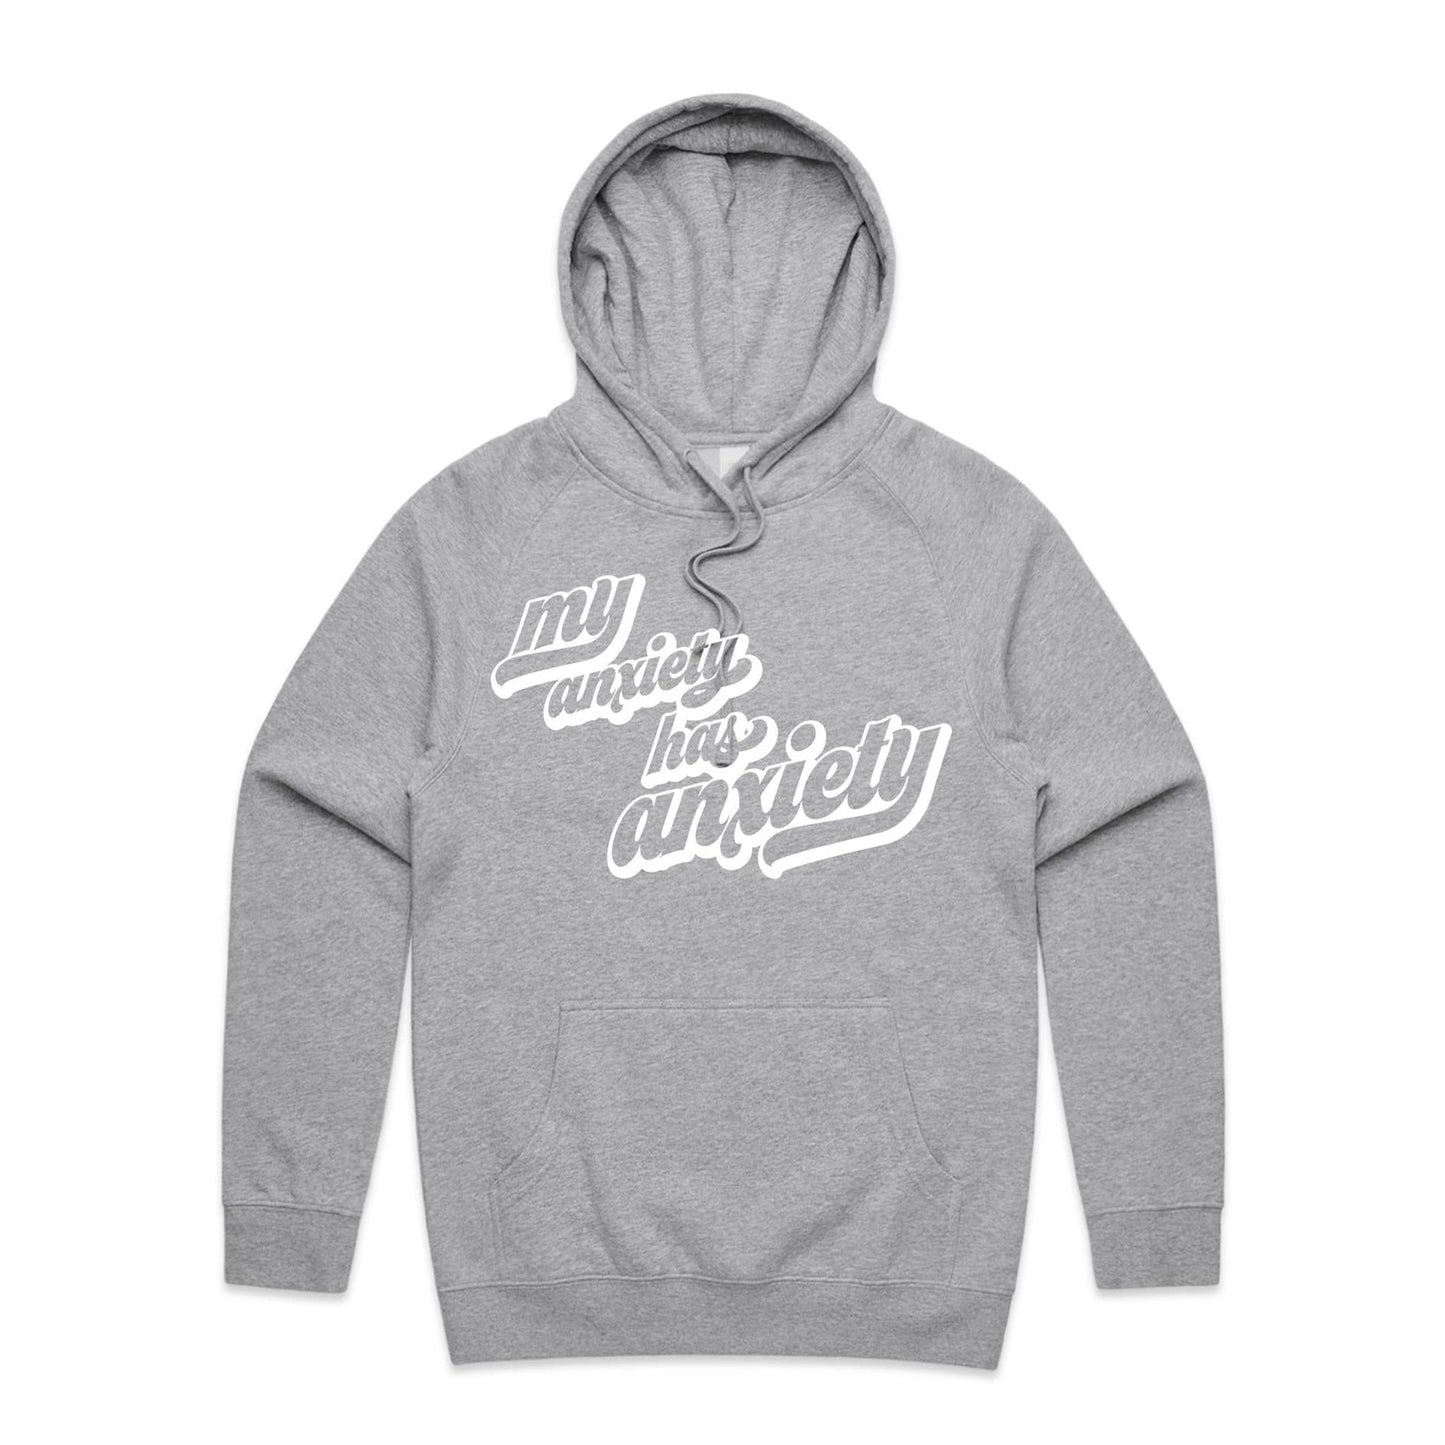 Unisex Hoodie - My Anxiety has Anxiety